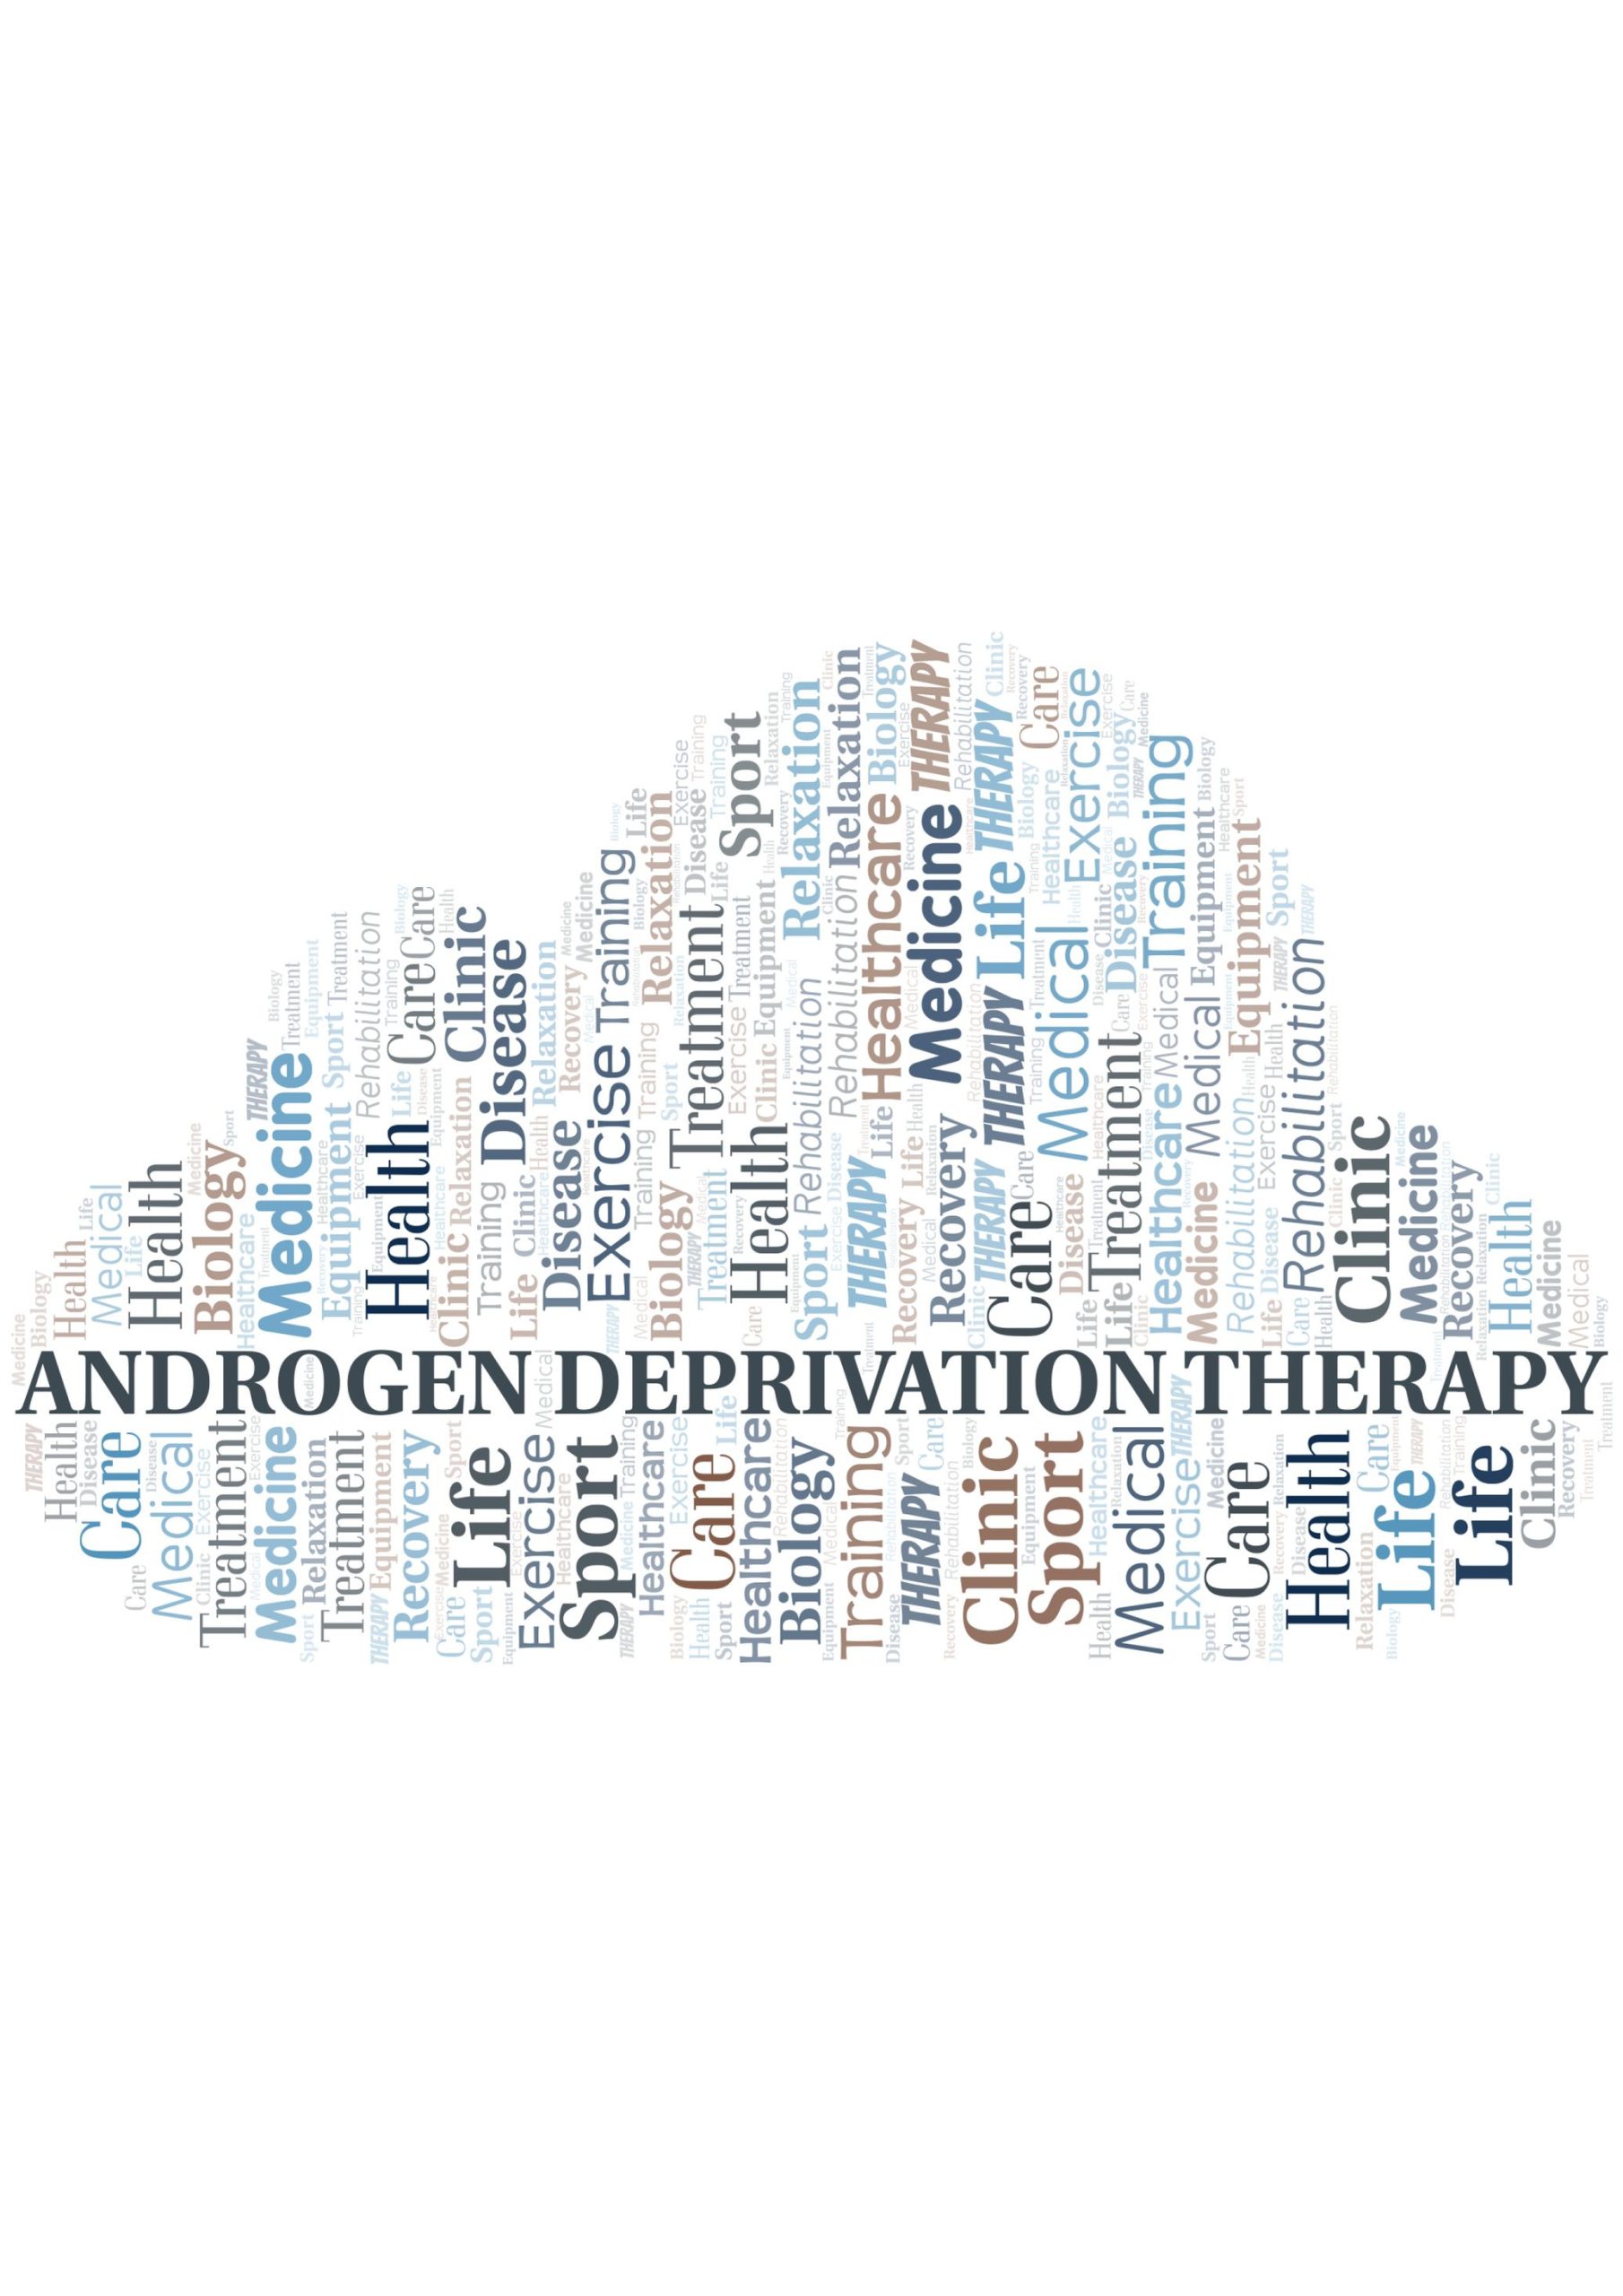 Study Finds Optimal Duration of Androgen Deprivation Therapy for Prostate Cancer